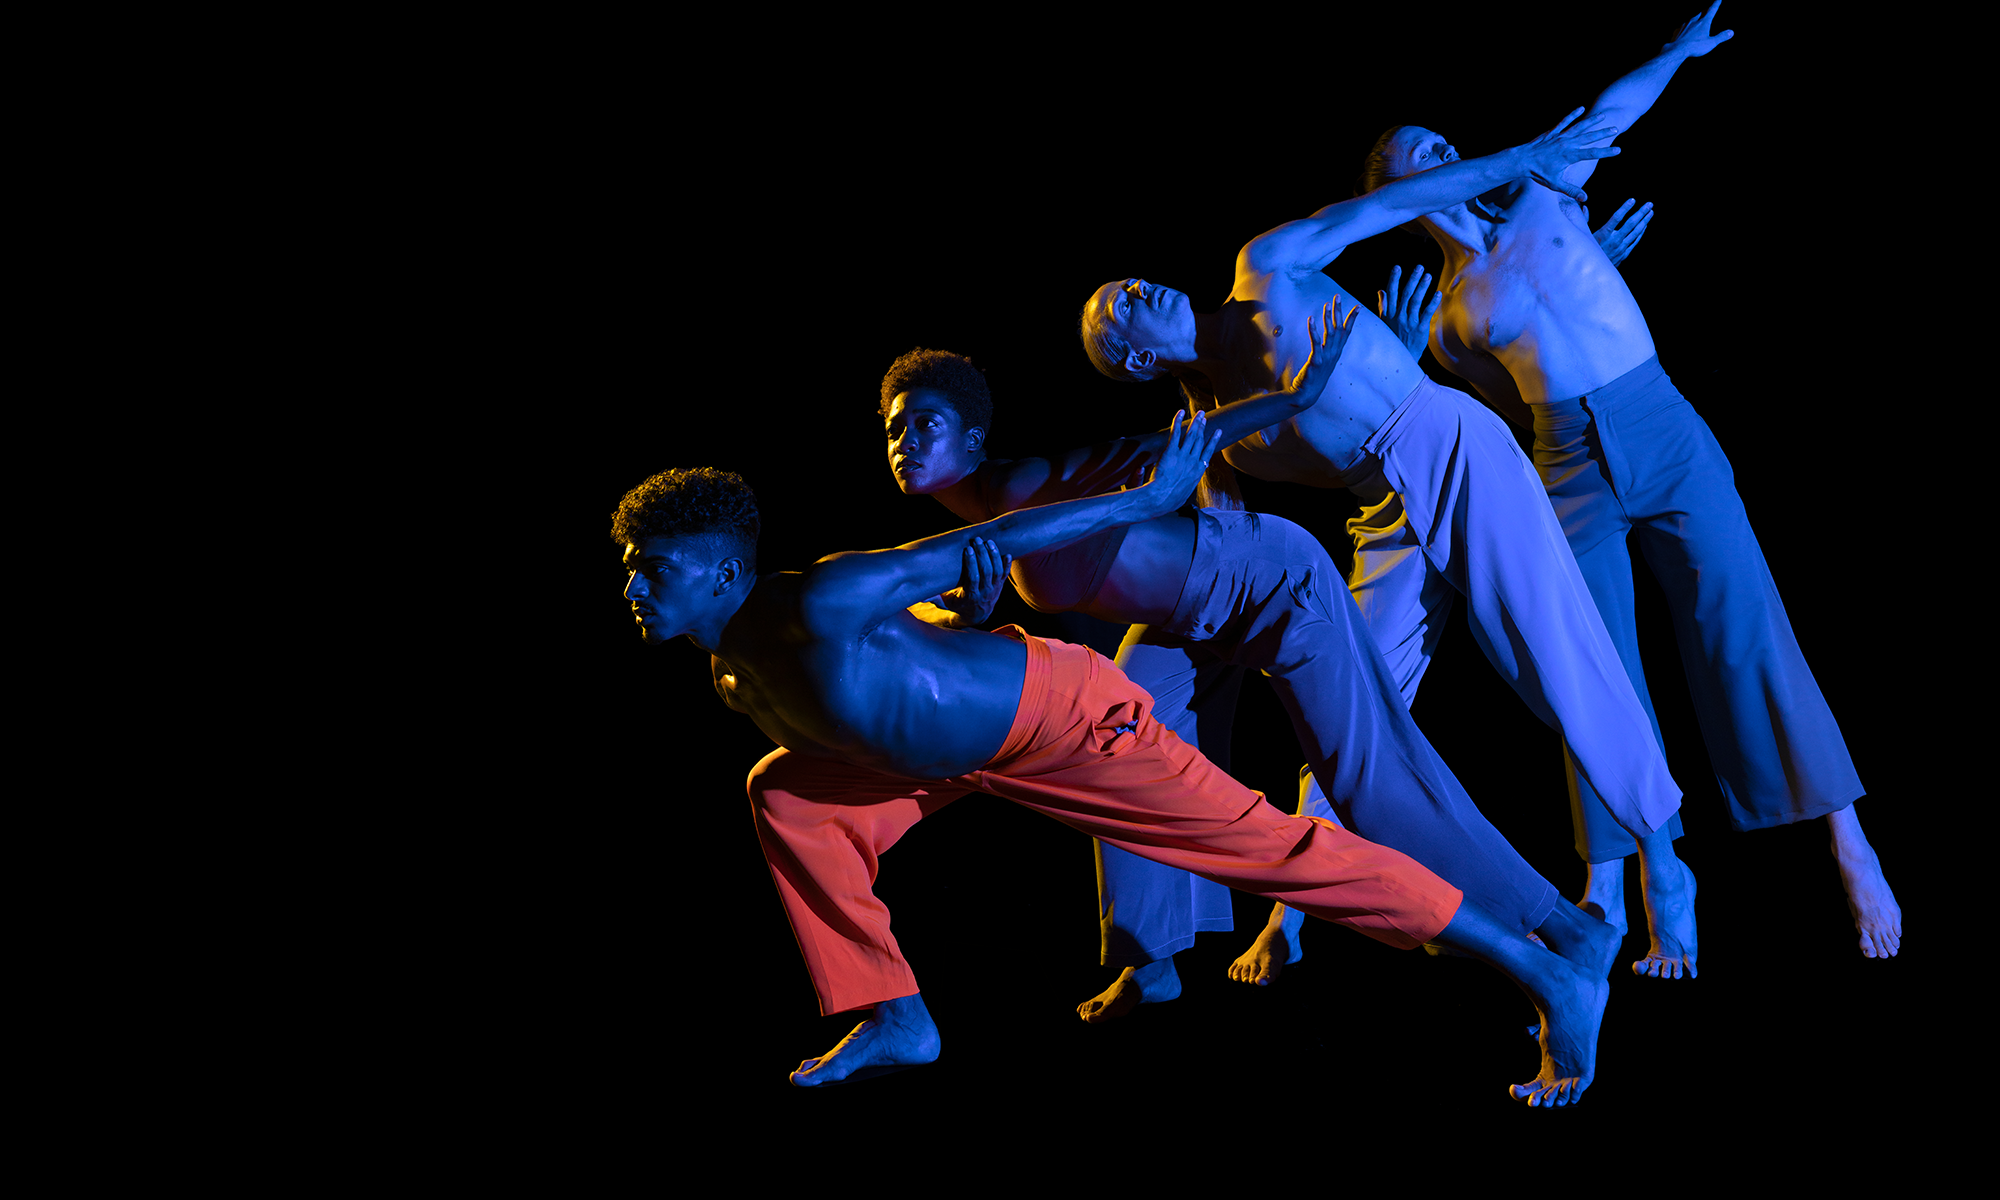 Four dancers leaning forward in a line